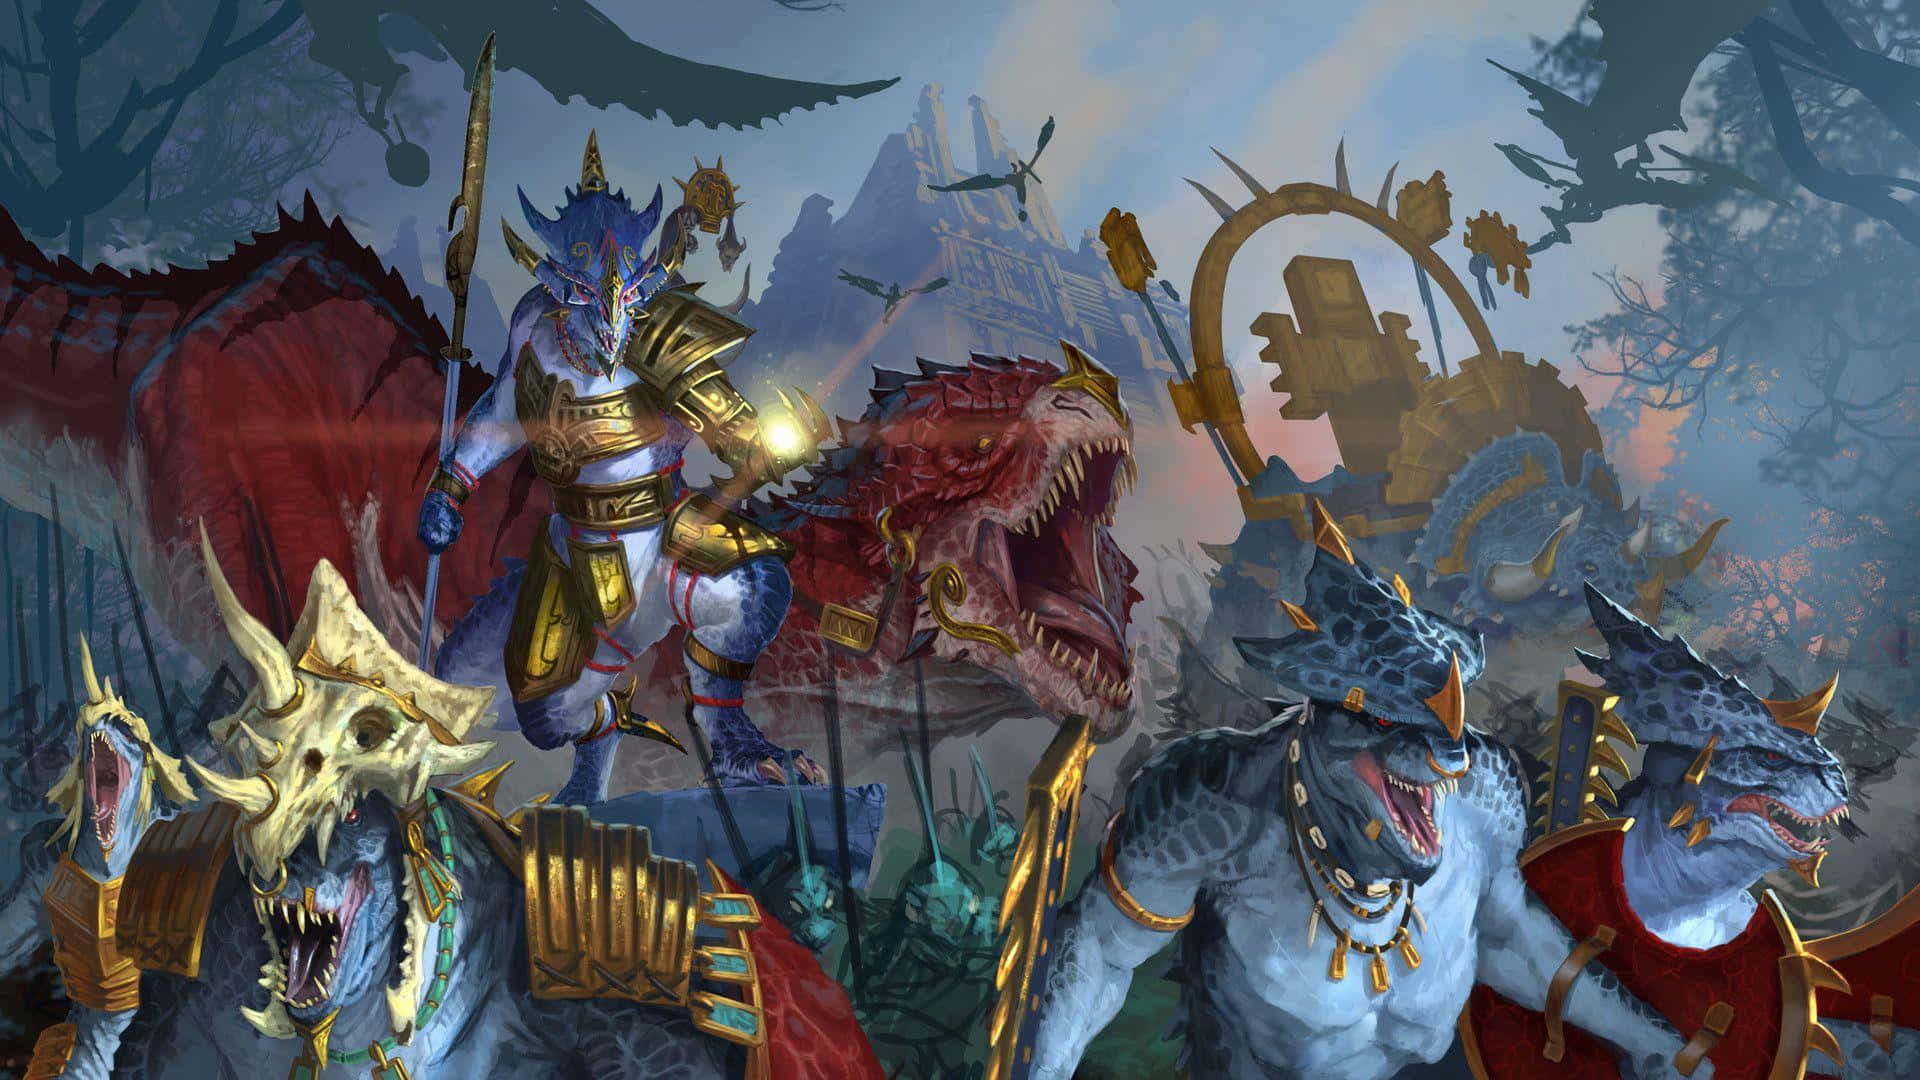 "Command the fierce races of Warhammer and conquer the land in Total War: Warhammer"